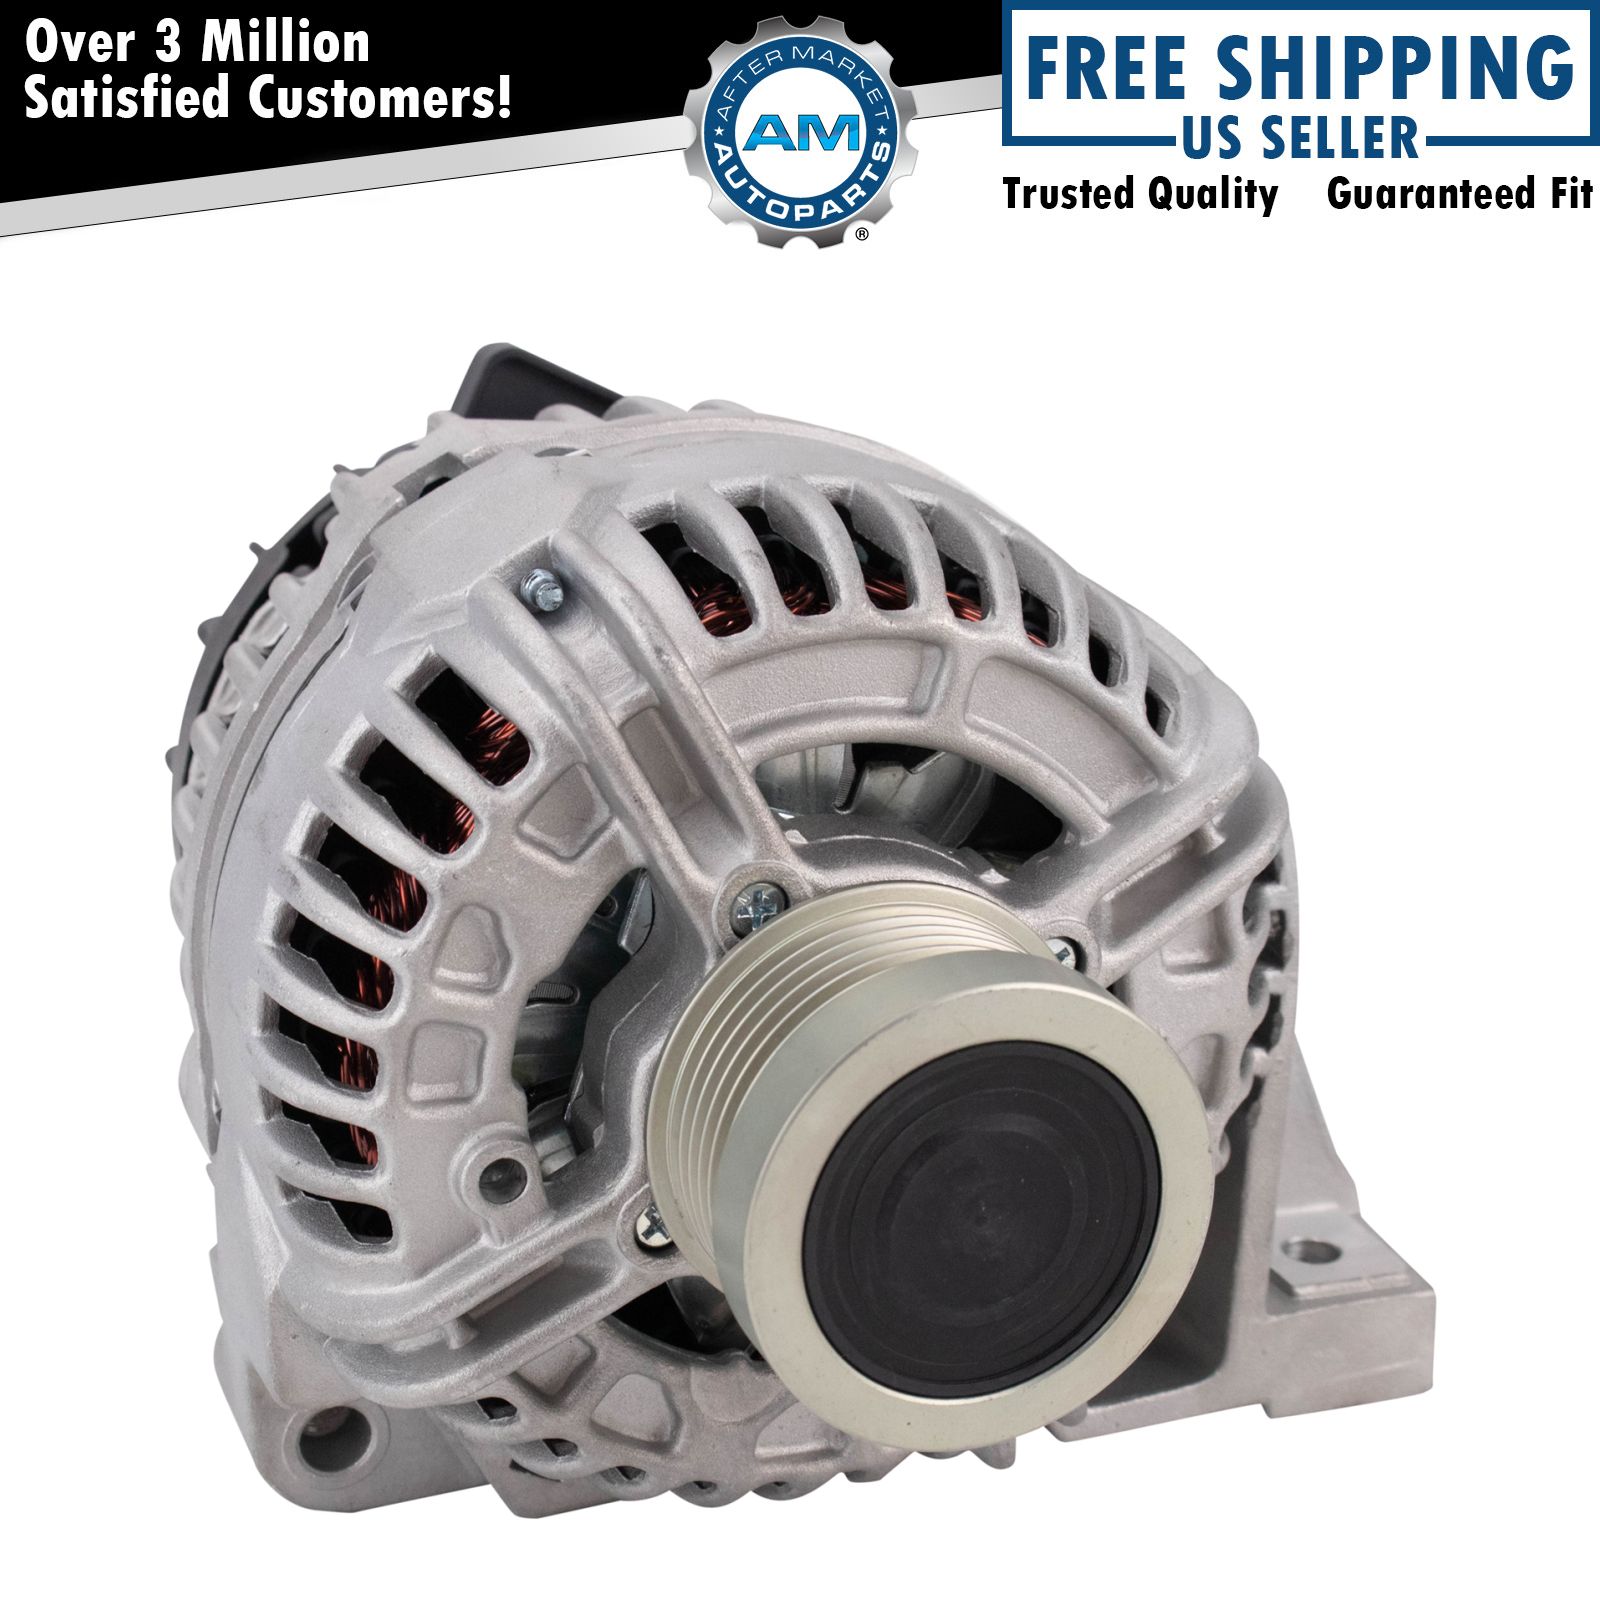 New Replacement Alternator for Volvo 00-04 C70 S60 99-00 S70 V70